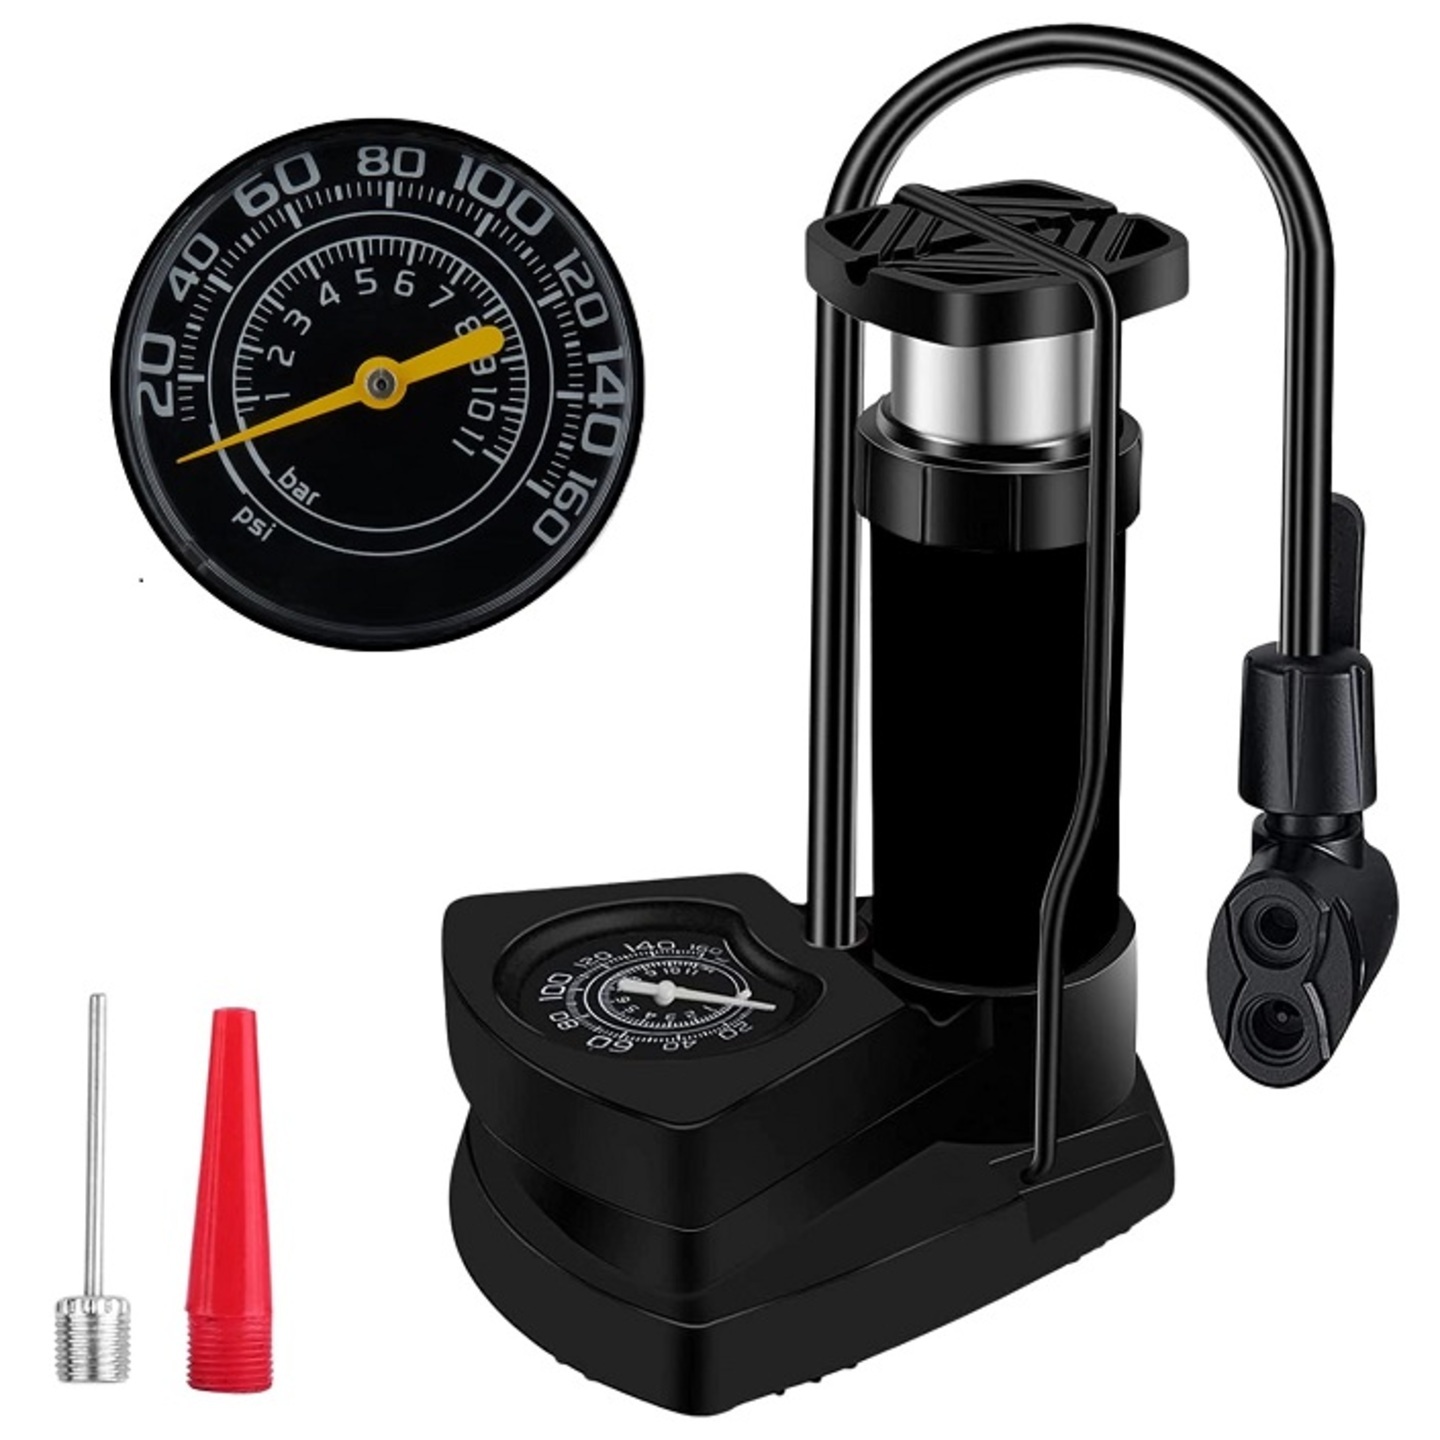 Portable Tyre inflator pump with Pressure Gauge for Bike, Car, Cycle and Football